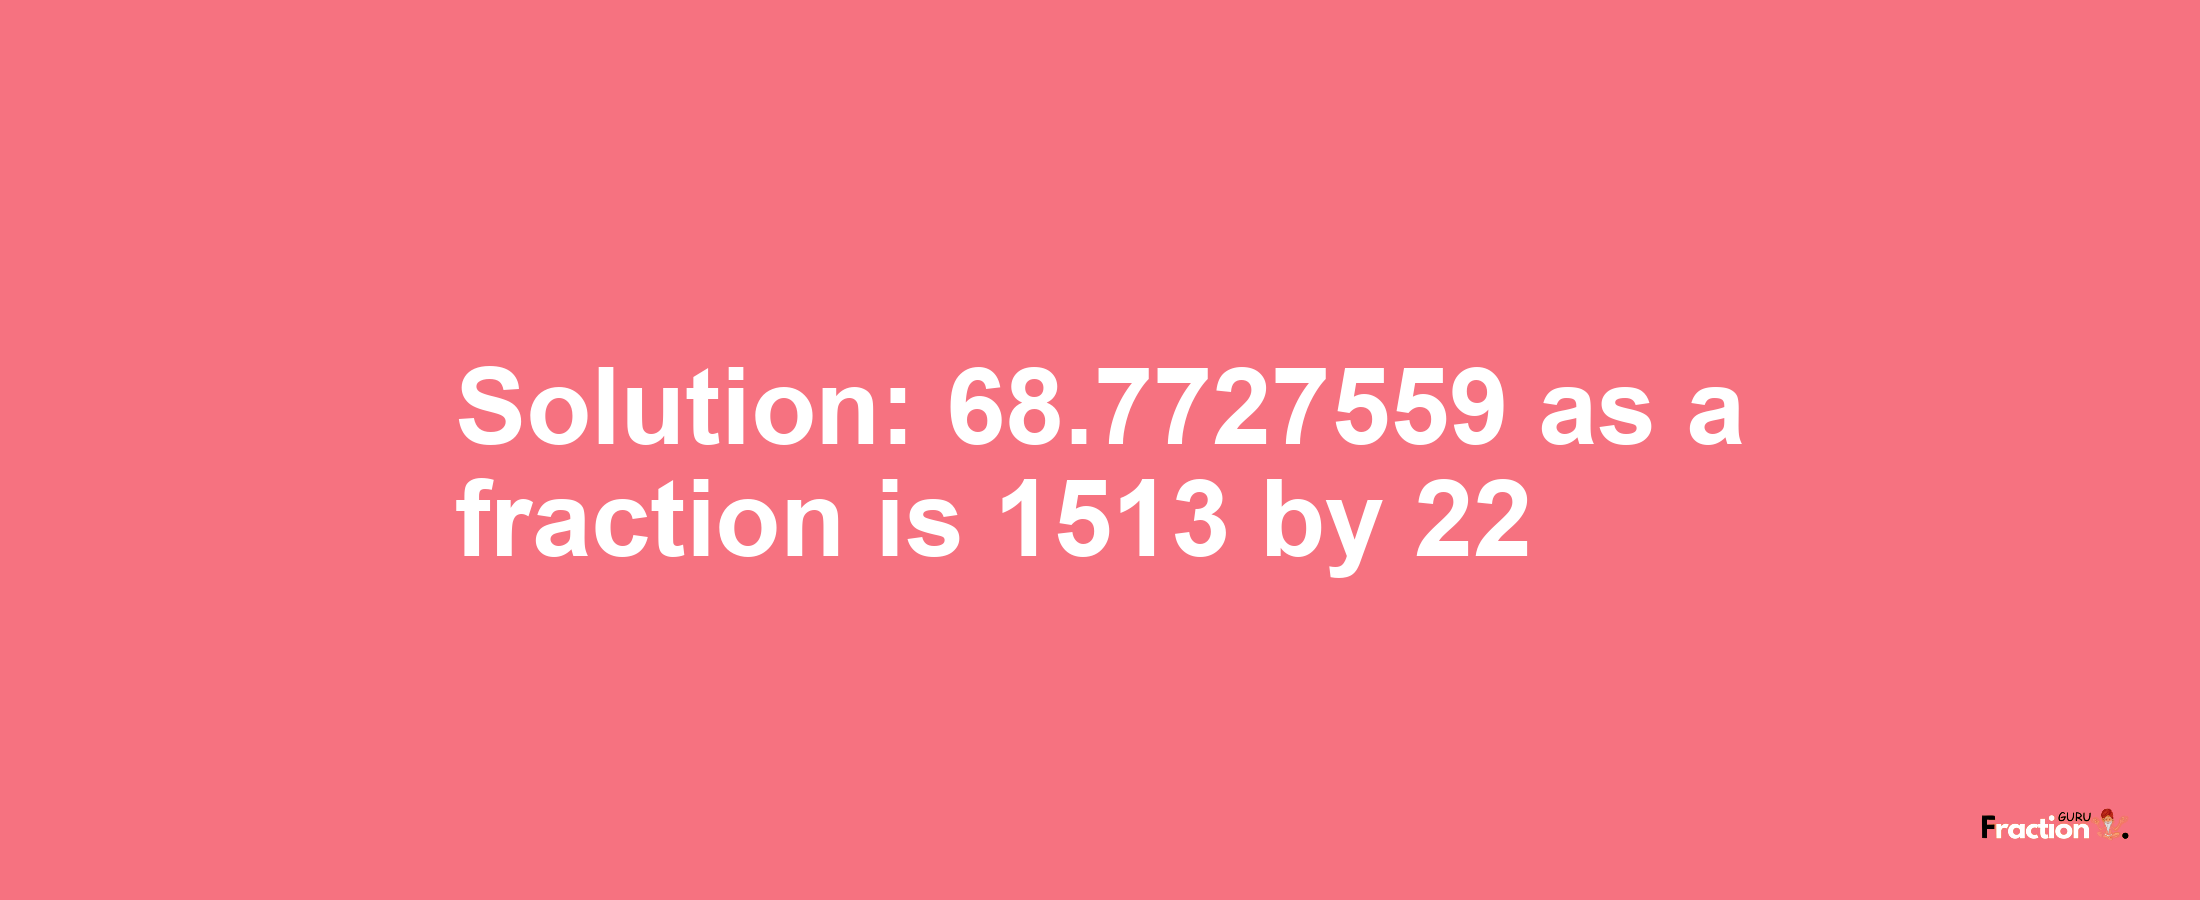 Solution:68.7727559 as a fraction is 1513/22